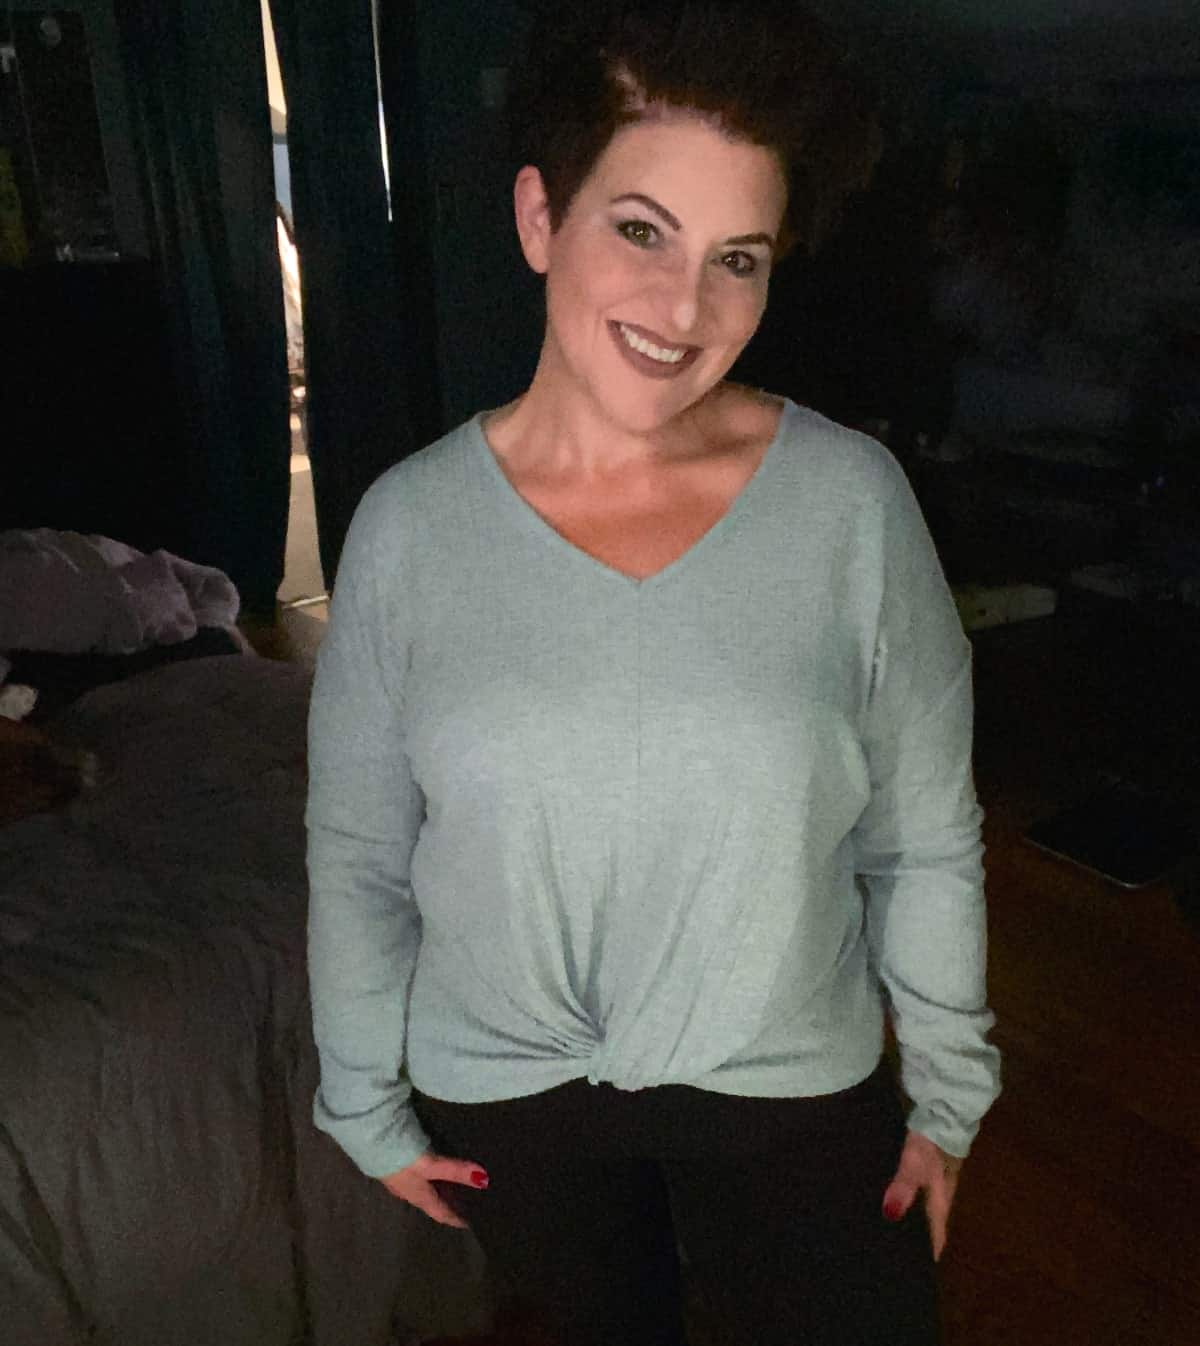 Colleen after losing over 100 pounds.